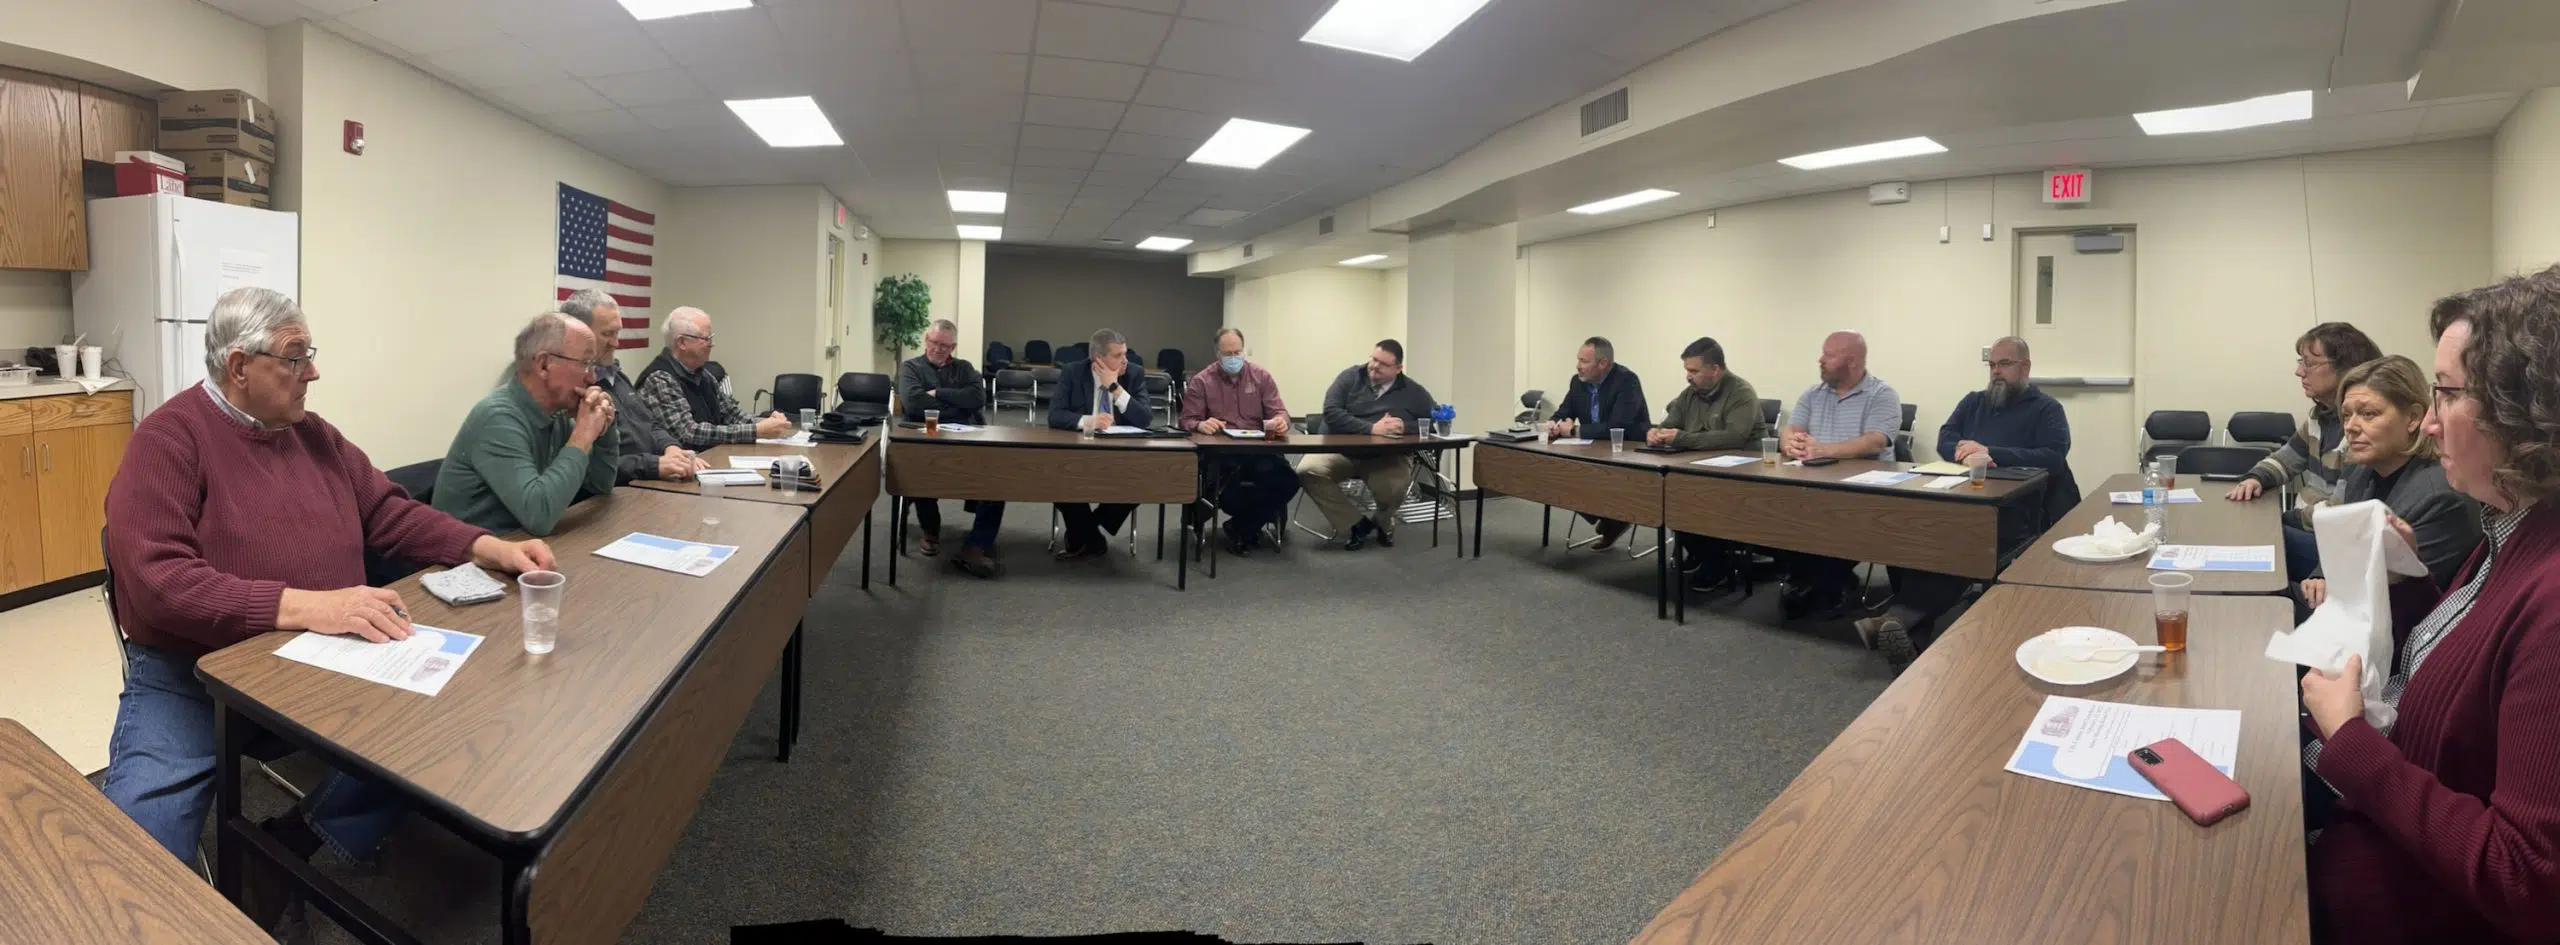 Economic development policy dominates joint meeting for Emporia, Lyon County leaders